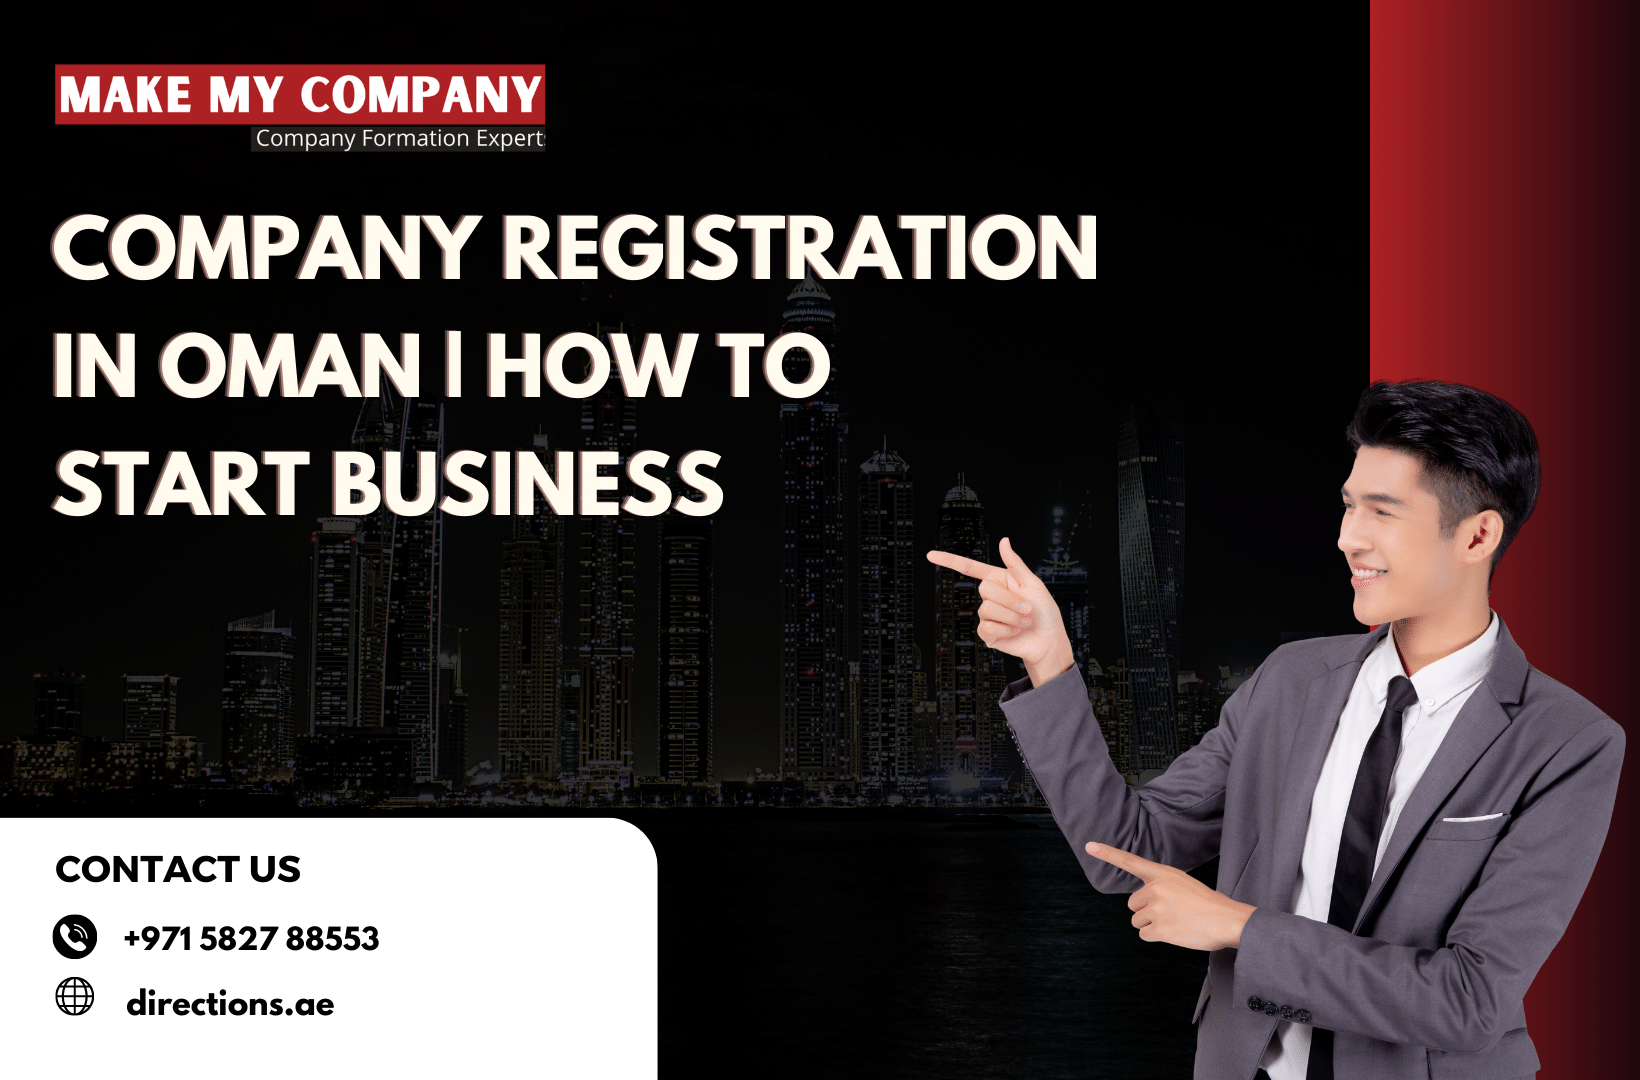 Company Registration in Oman How to Start Business